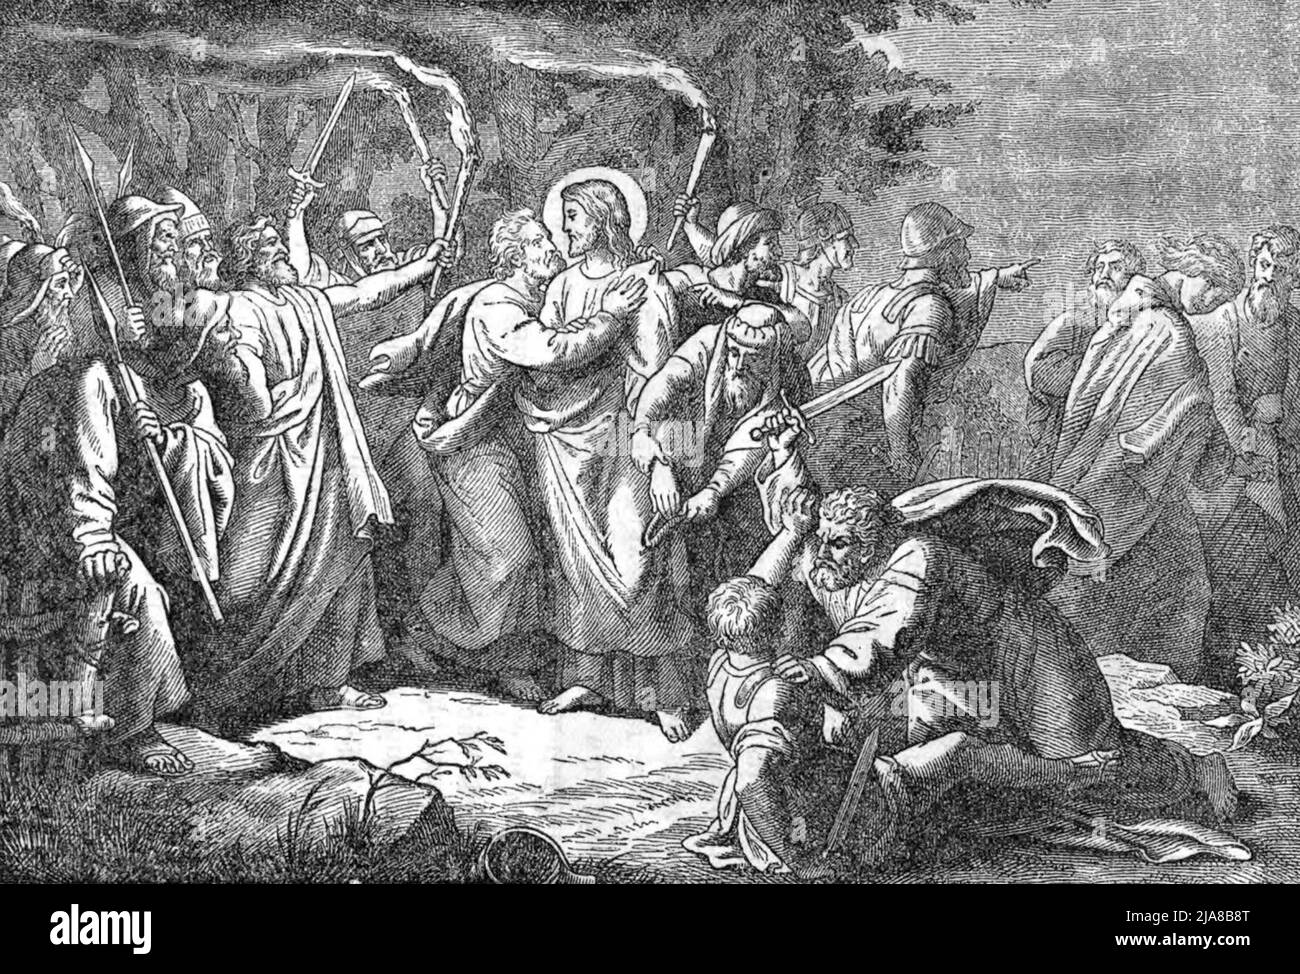 The Kiss of Judas engraving  depicts Judas' identifying kiss in the Garden of Gethsemane Stock Photo